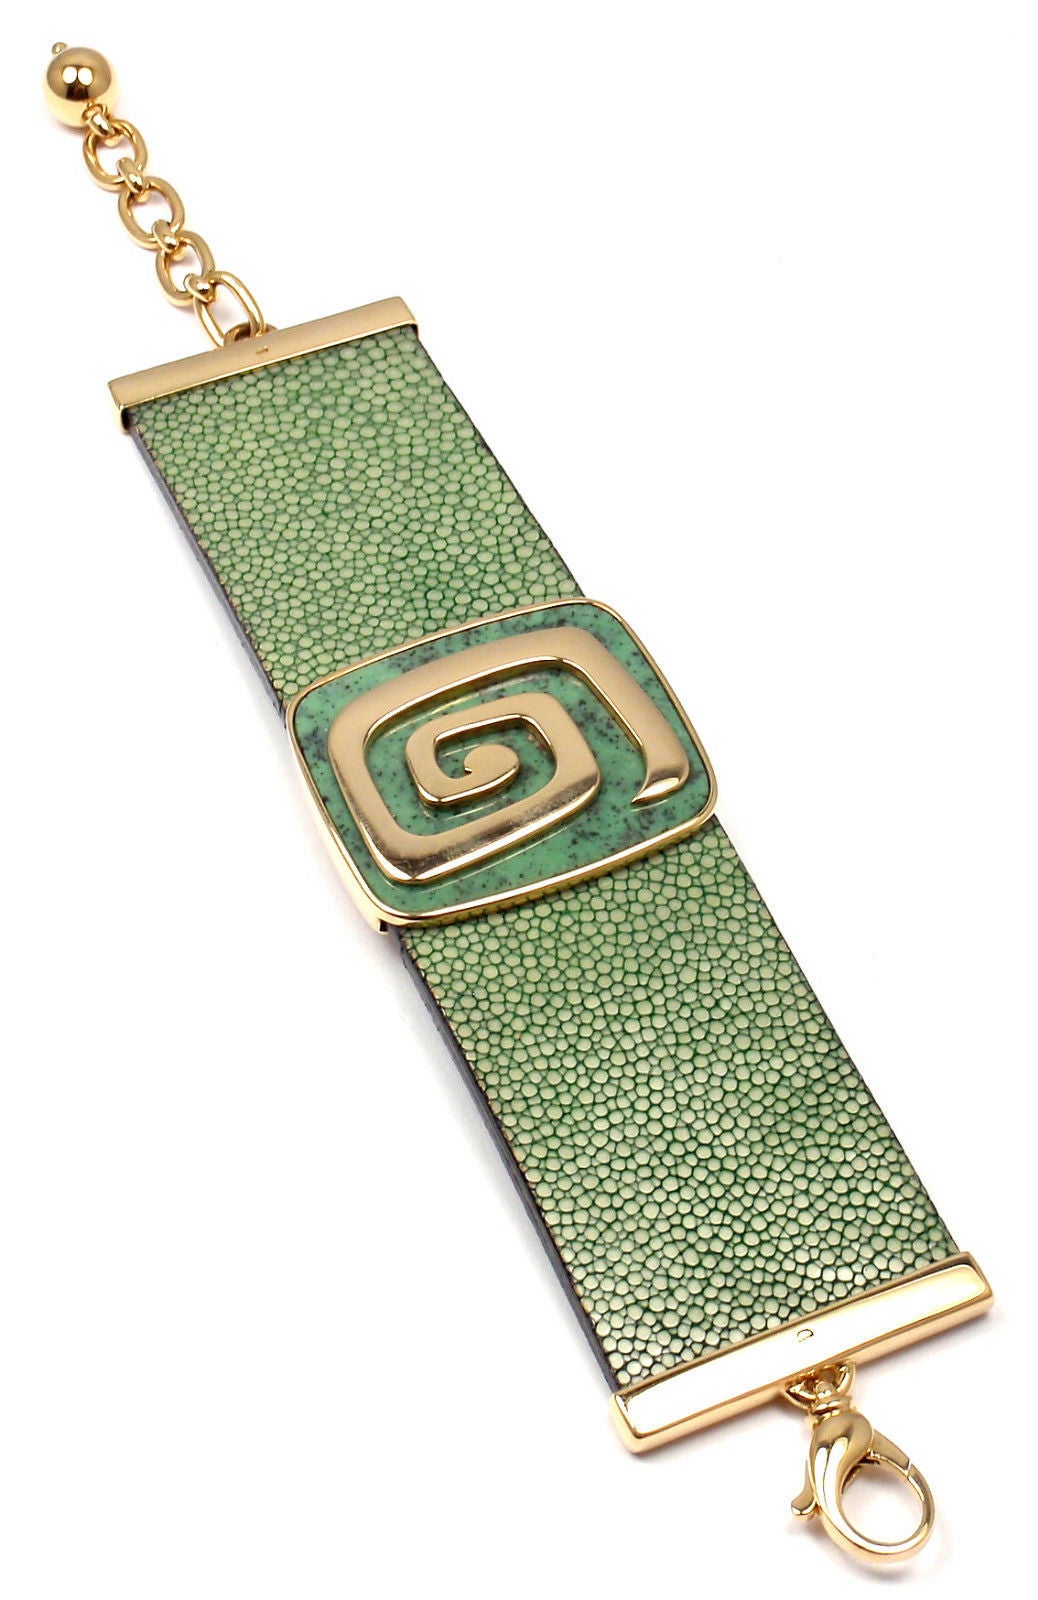 18k Yellow Gold Green Garnet Stingray Cuff Bracelet by Bulgari.
Limited edition Theme Collection green-dyed stingray cuff bracelet,
centering on a rectangular cushion-shaped plaque with applied gold spiral motif on green hydrogrossular garnet,